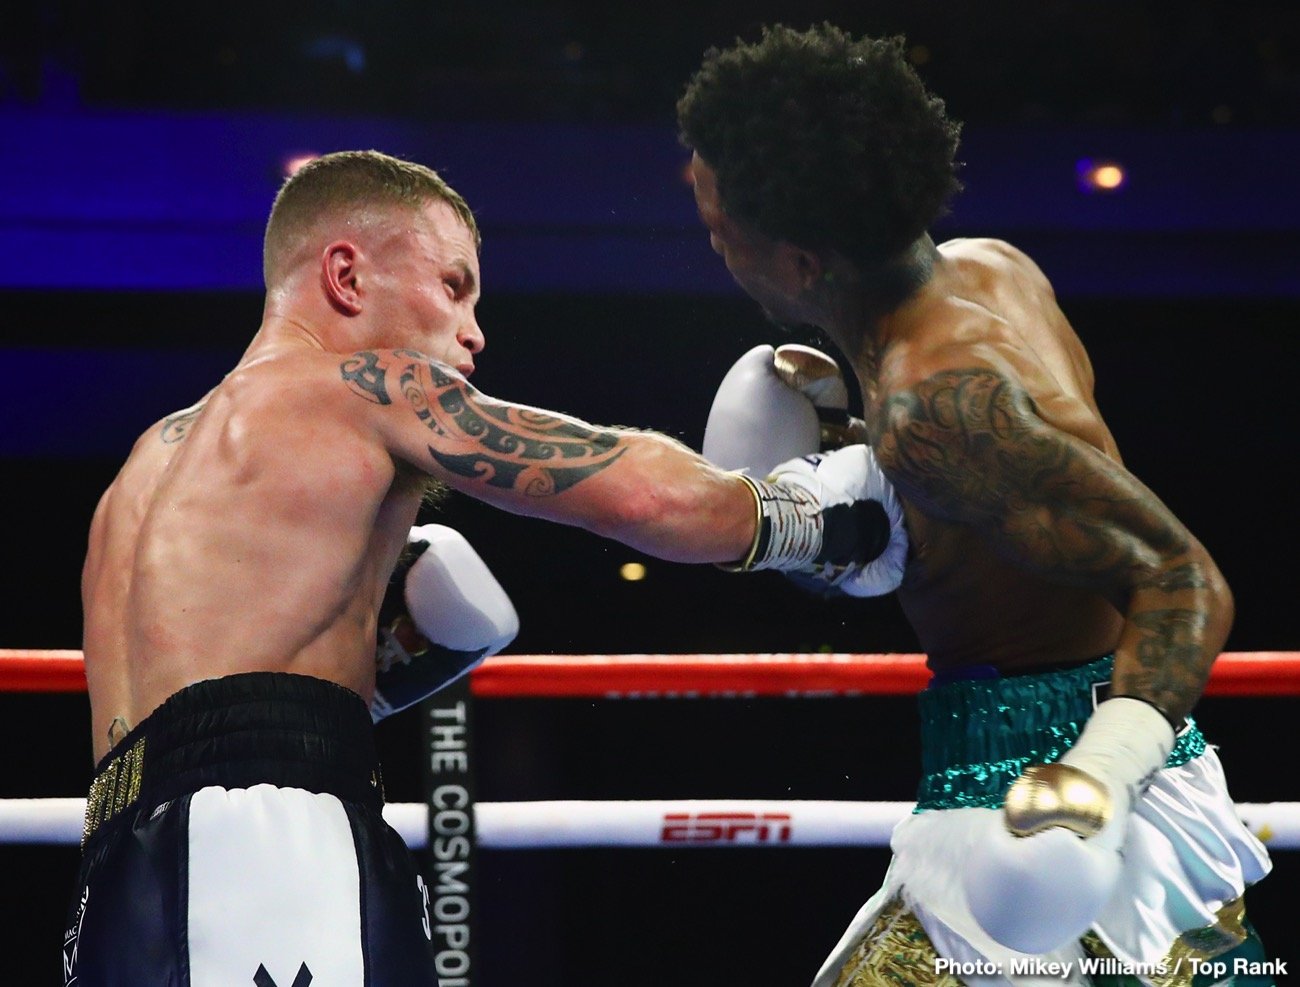 Image: Carl Frampton: "I will retire if I lose this fight" to Jamel Herring